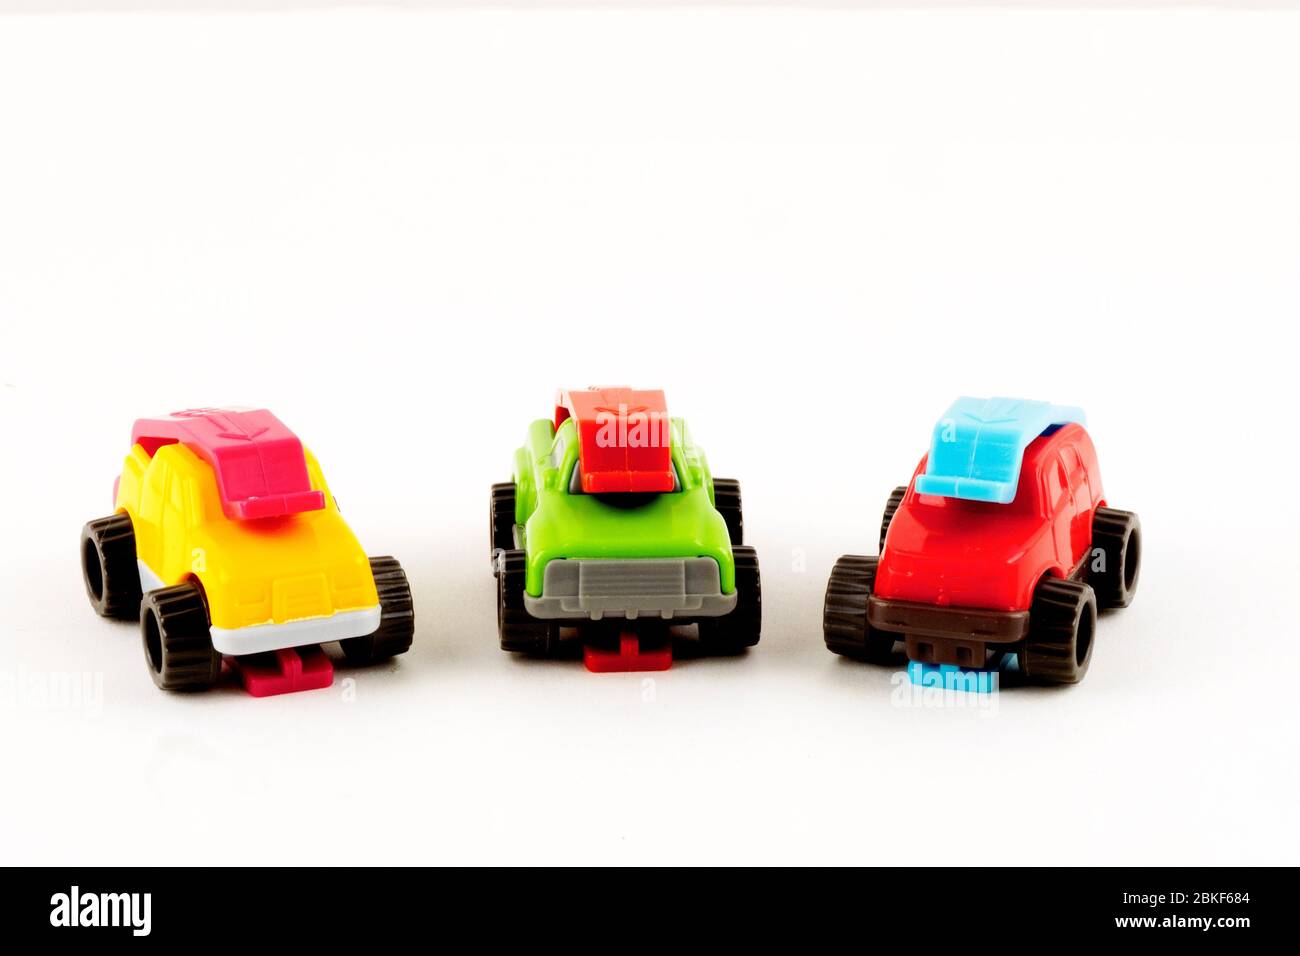 Matchbox Plastic truck toys isolated in white background Stock Photo